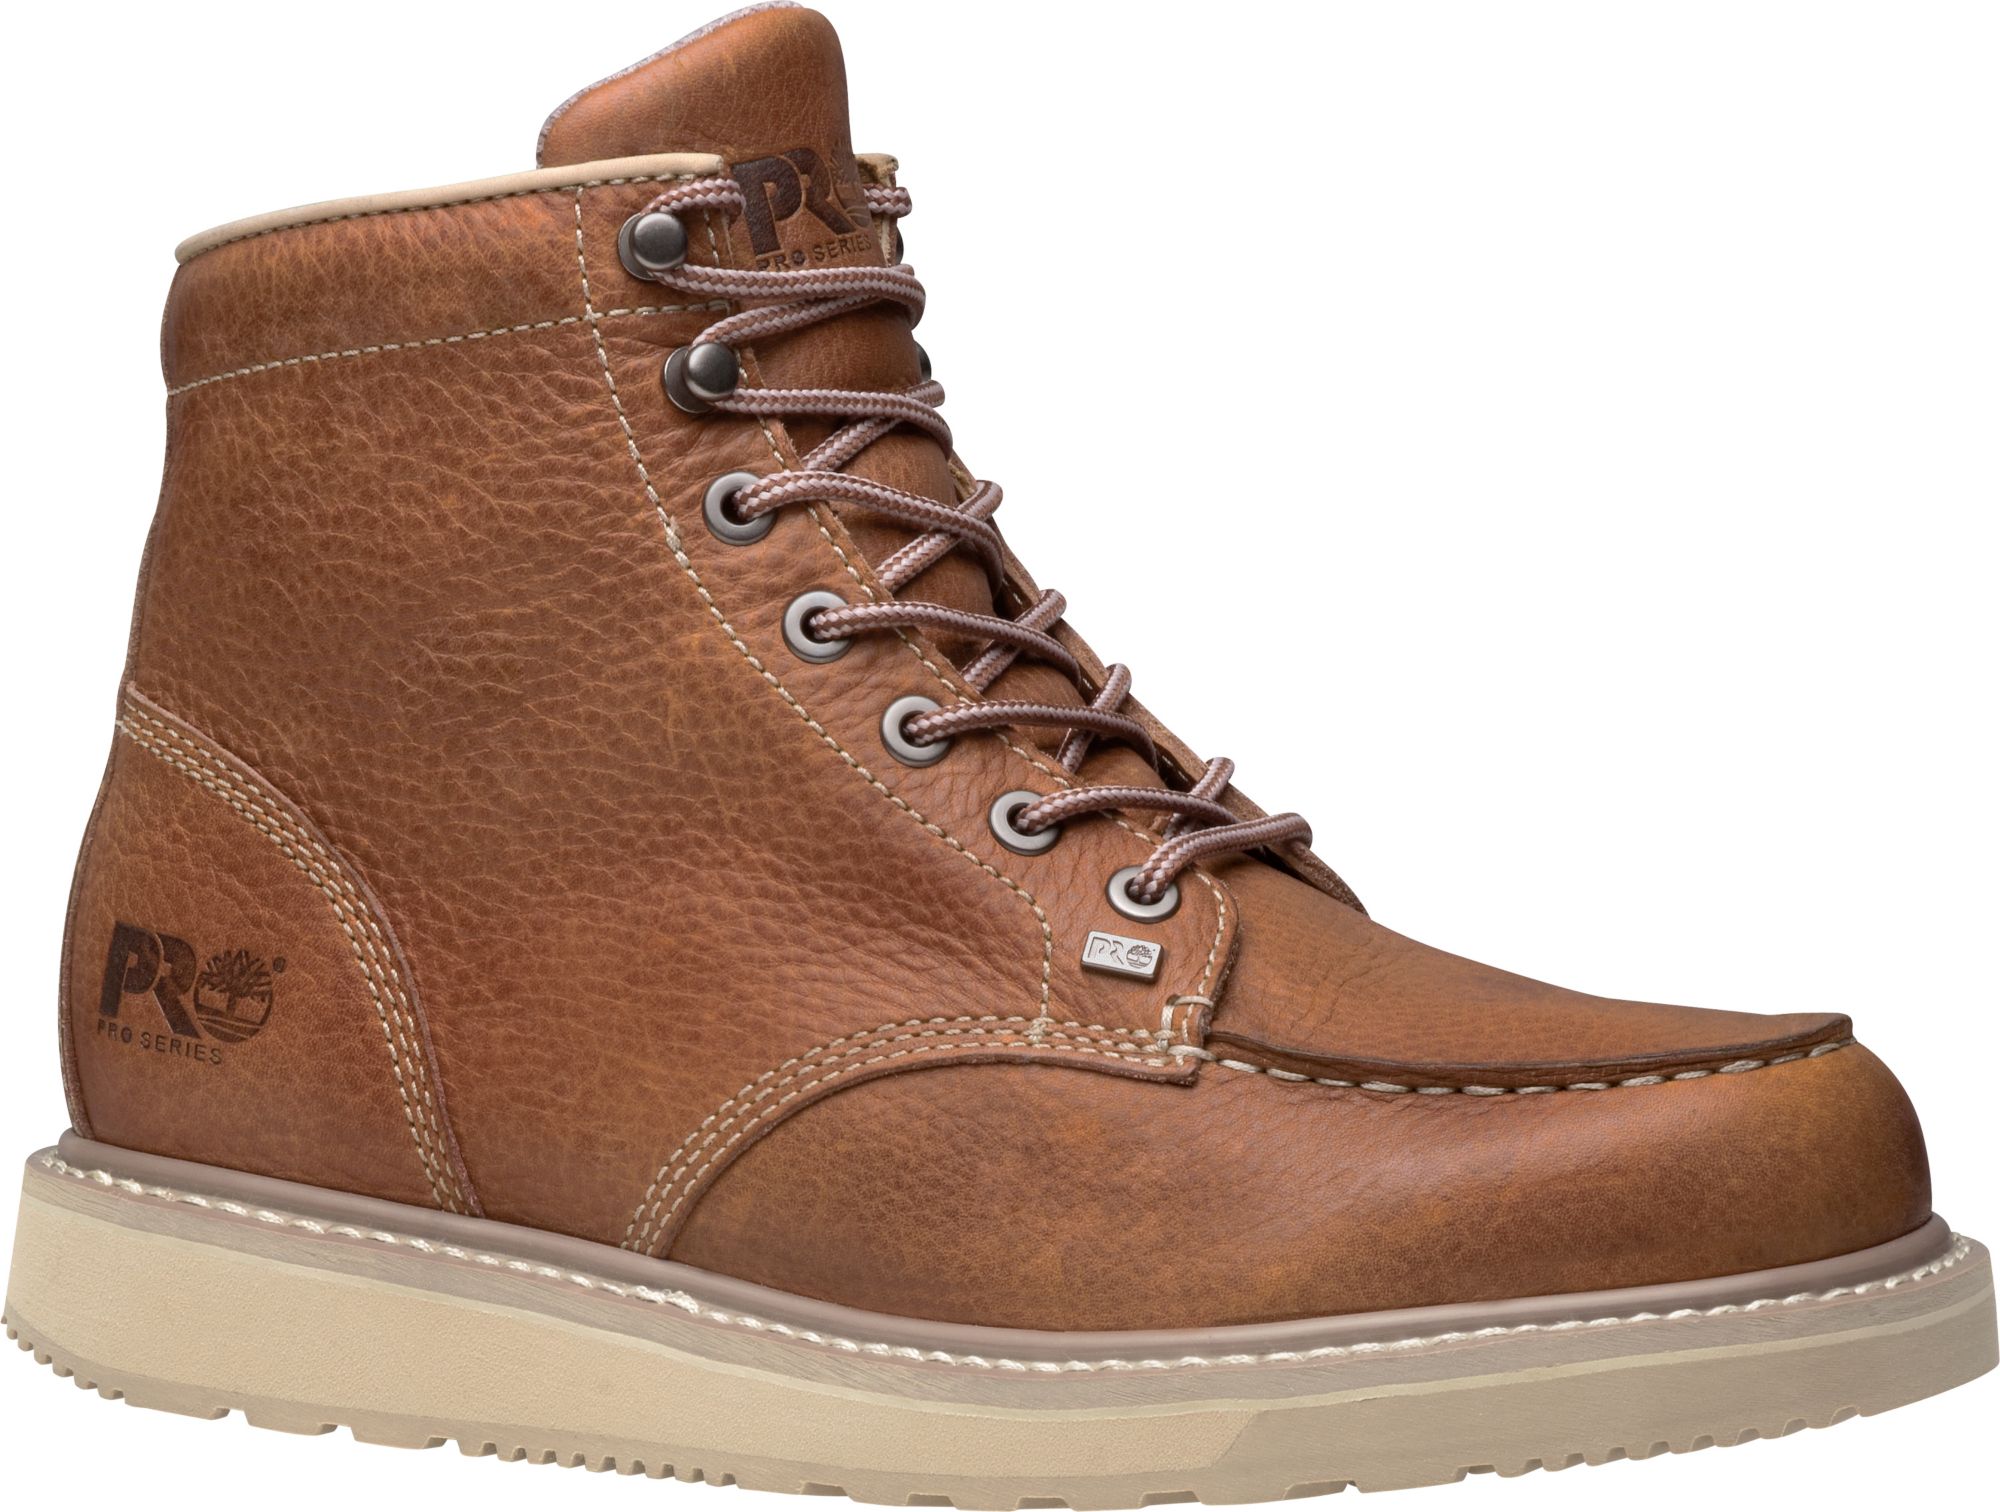 timberland pro wedge work boots